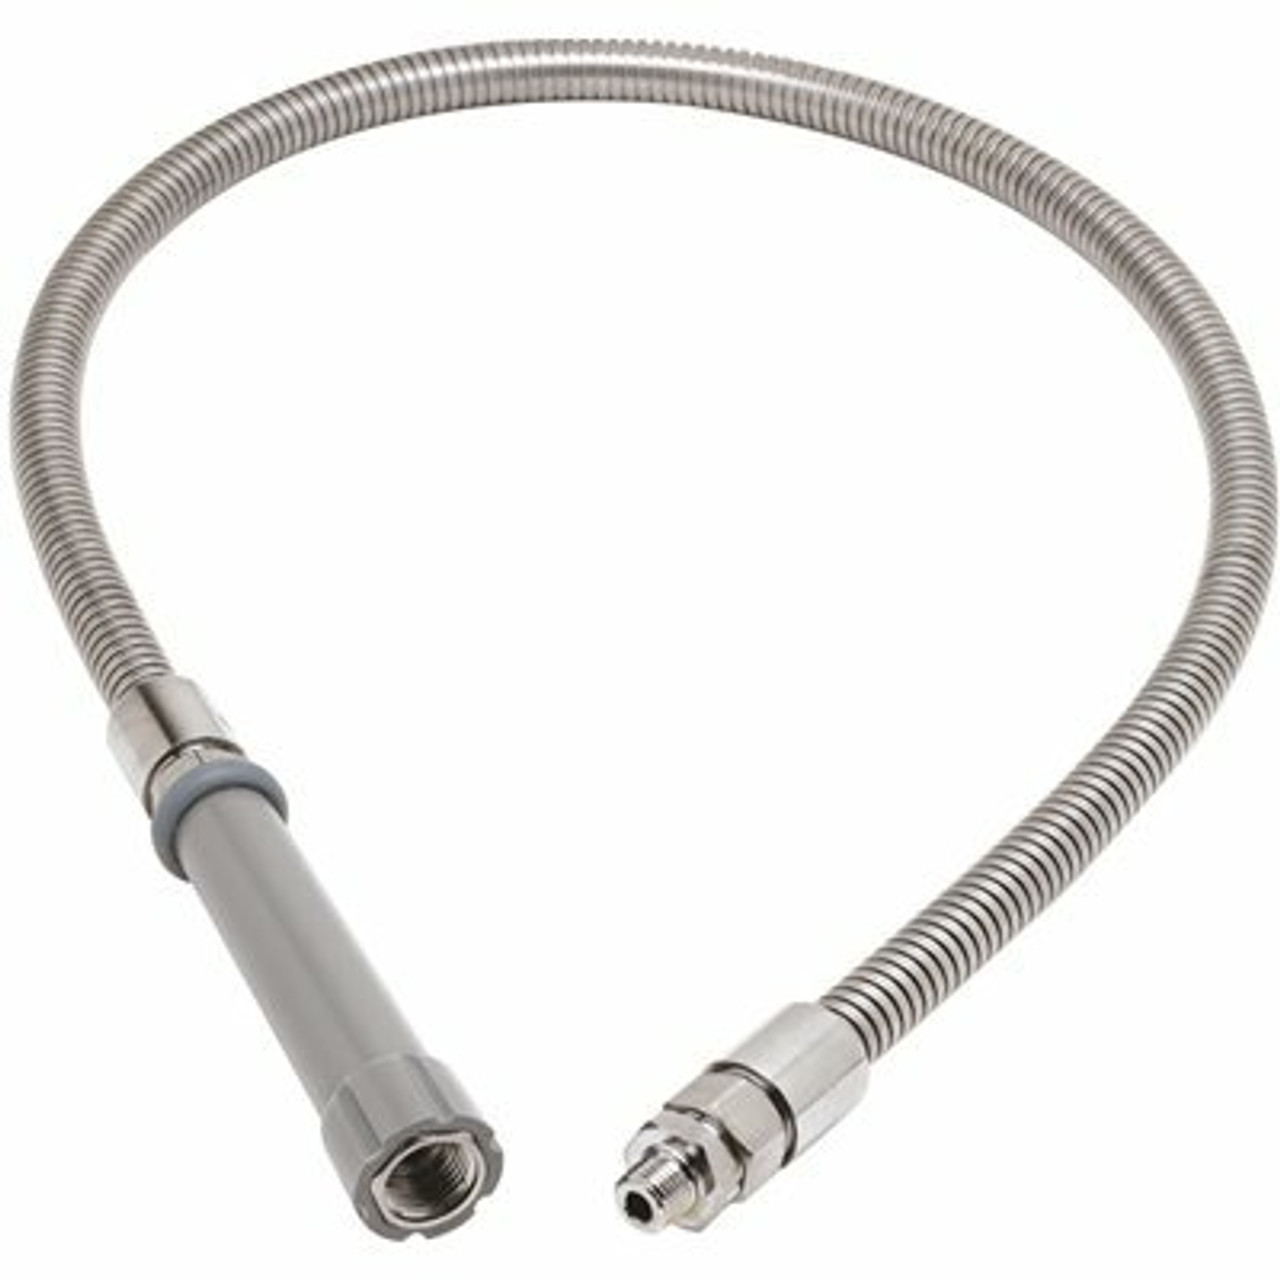 T&S Stainless Steel 44 In. Flexible Hose With Fisher Adapter